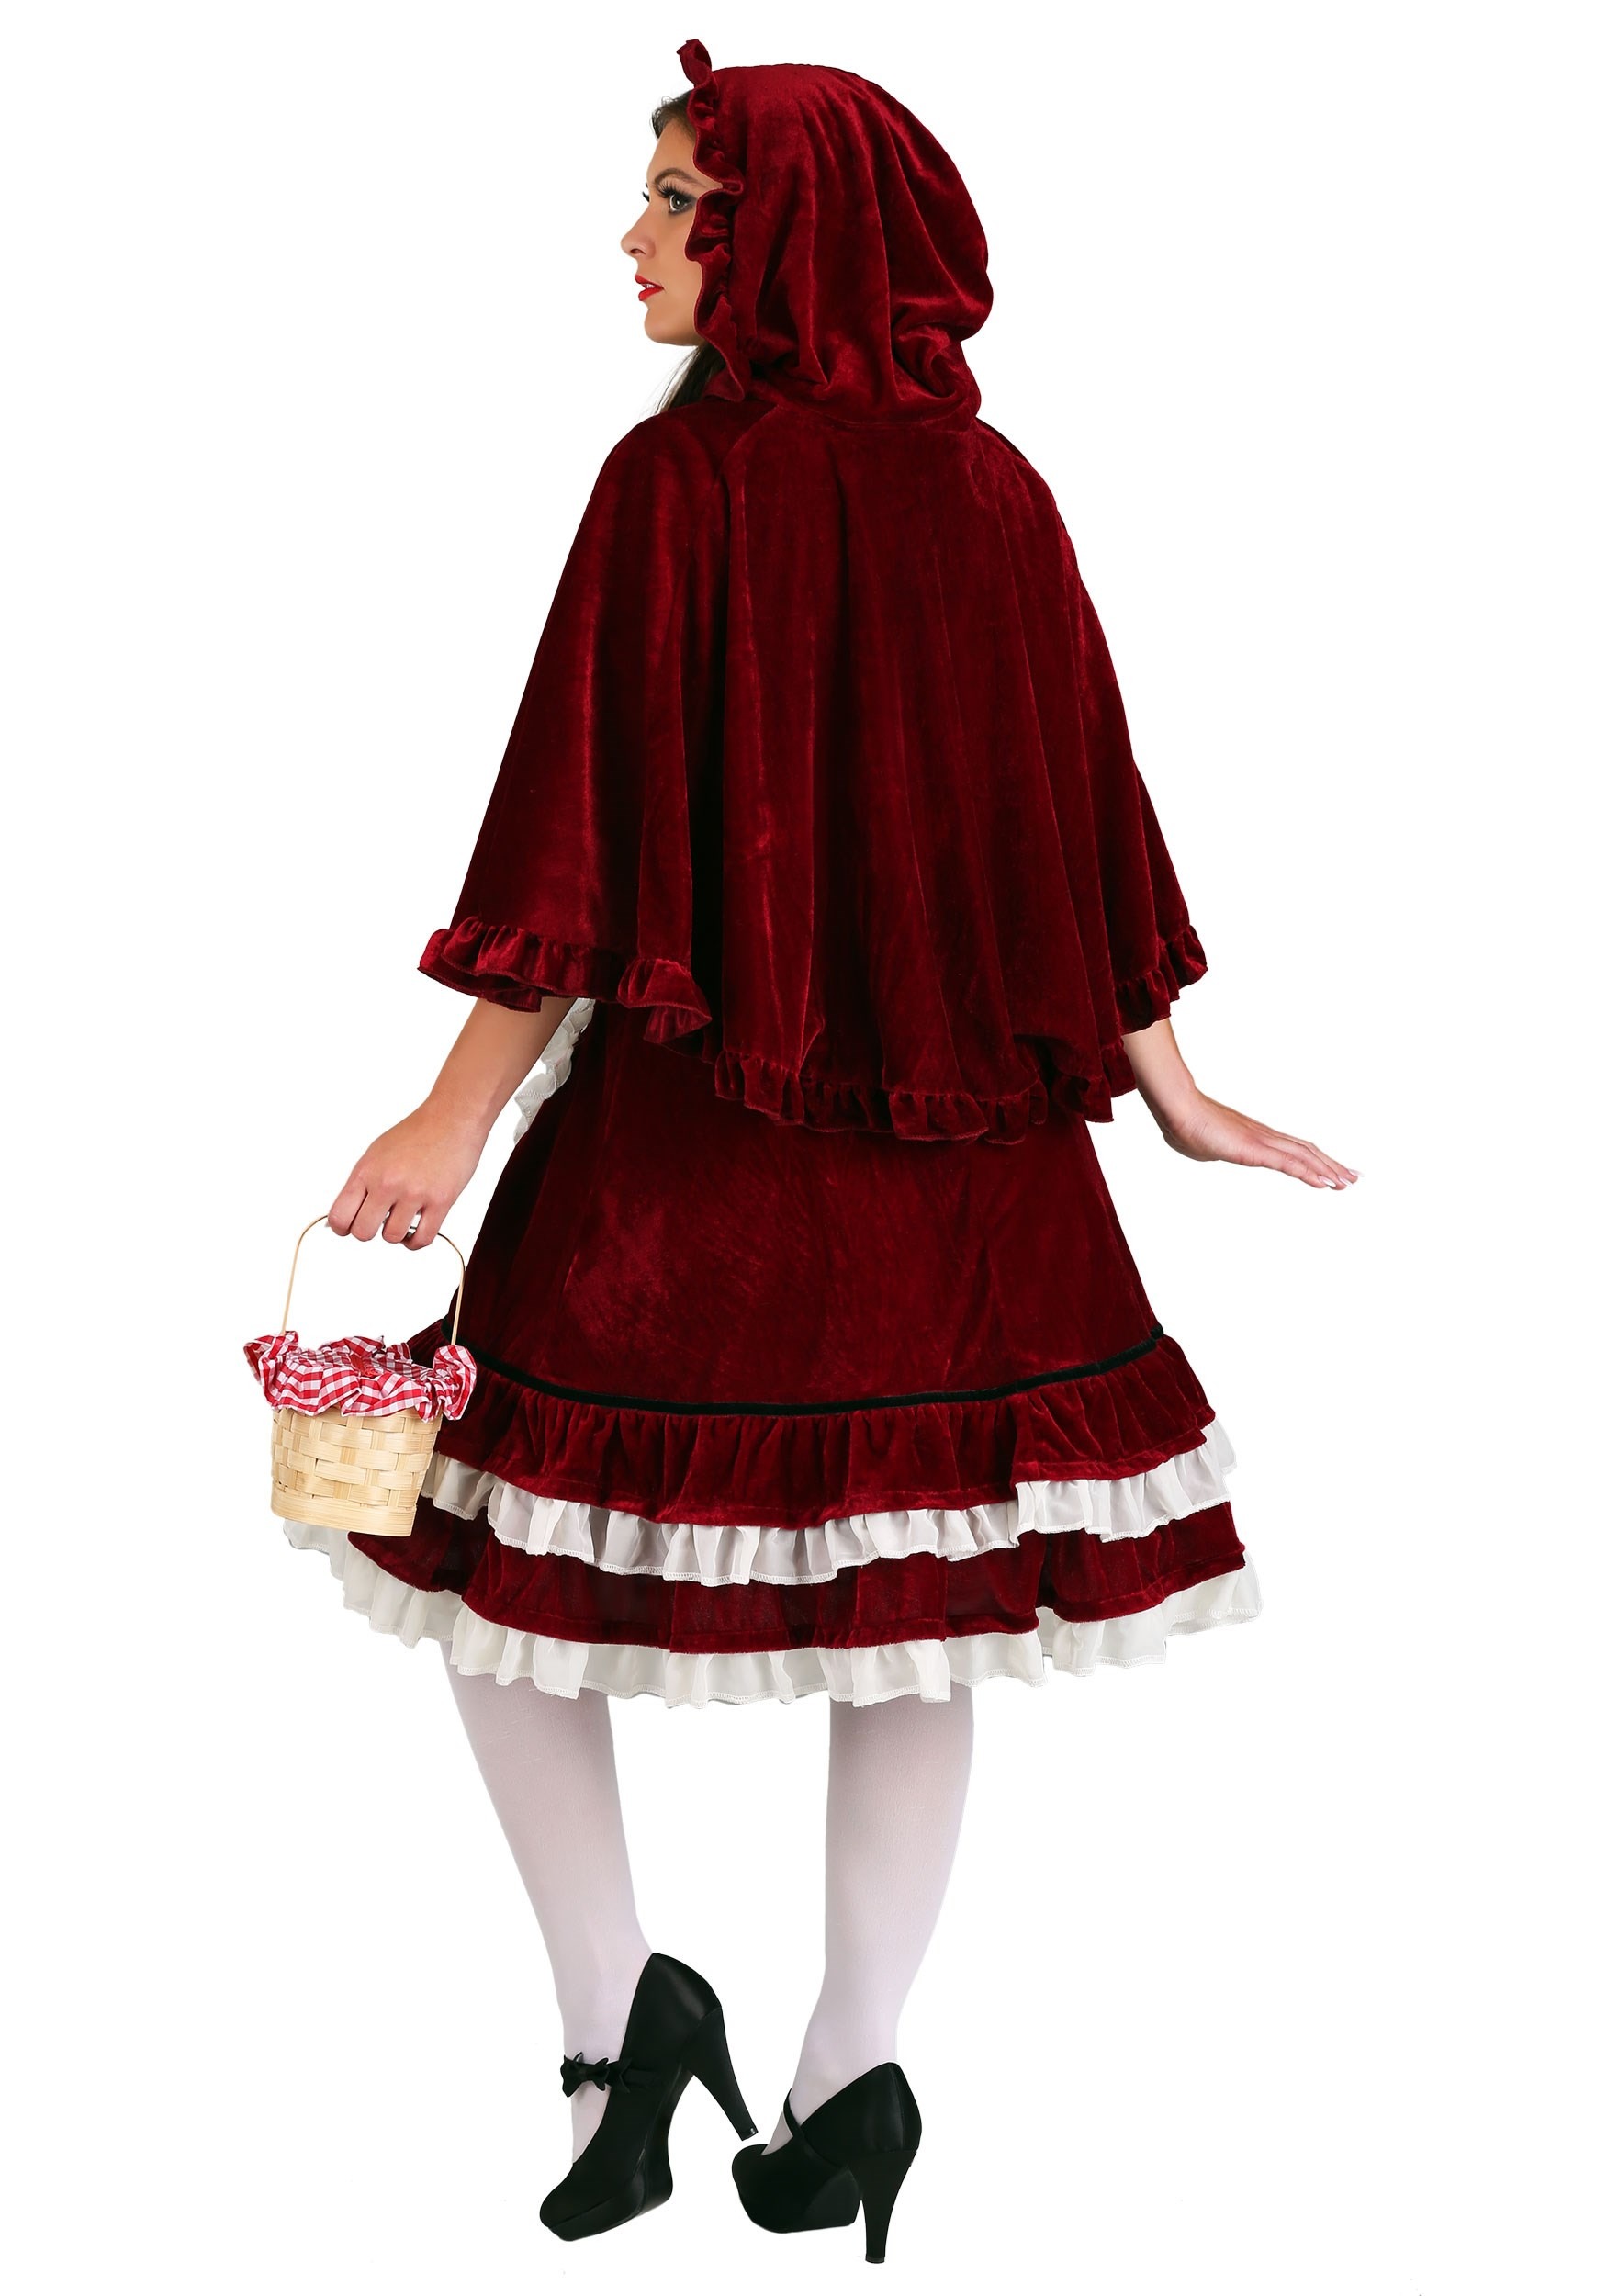 Classic Red Riding Hood Fancy Dress Costume For Women